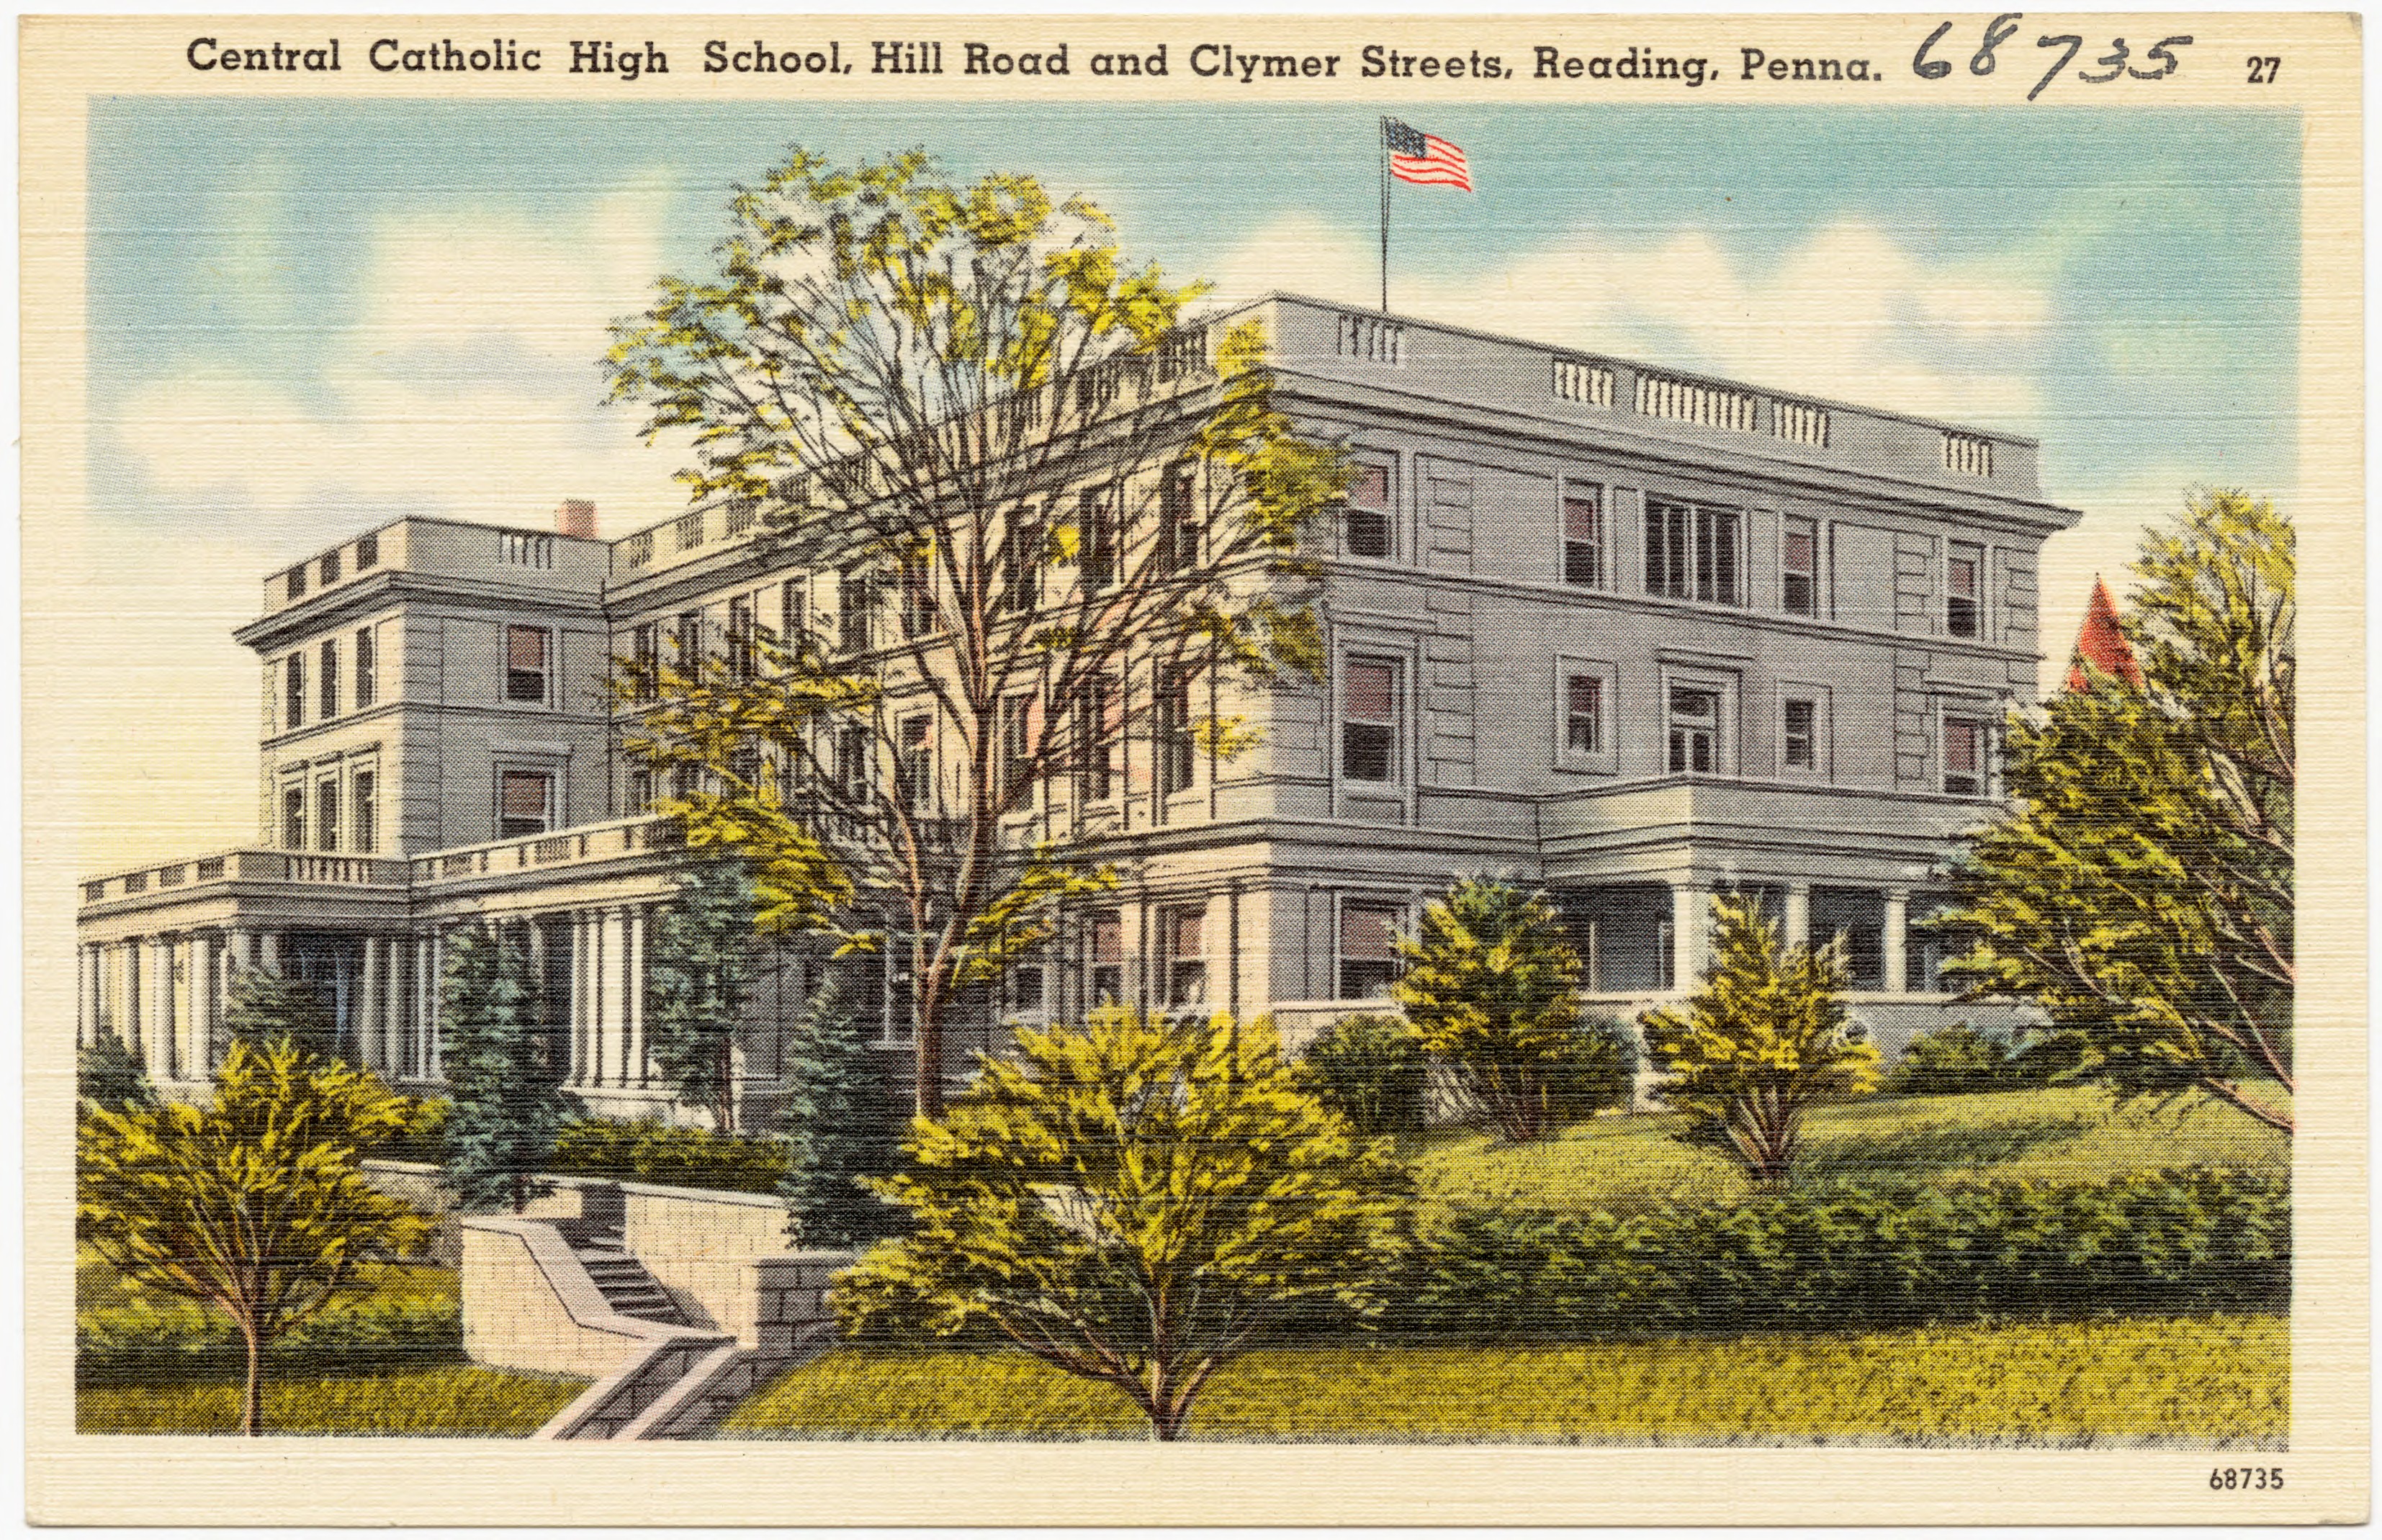 Center_Catholic_High_School,_Hill_Road_and_Clymer_streets,_Reading,_Penna_(68735)